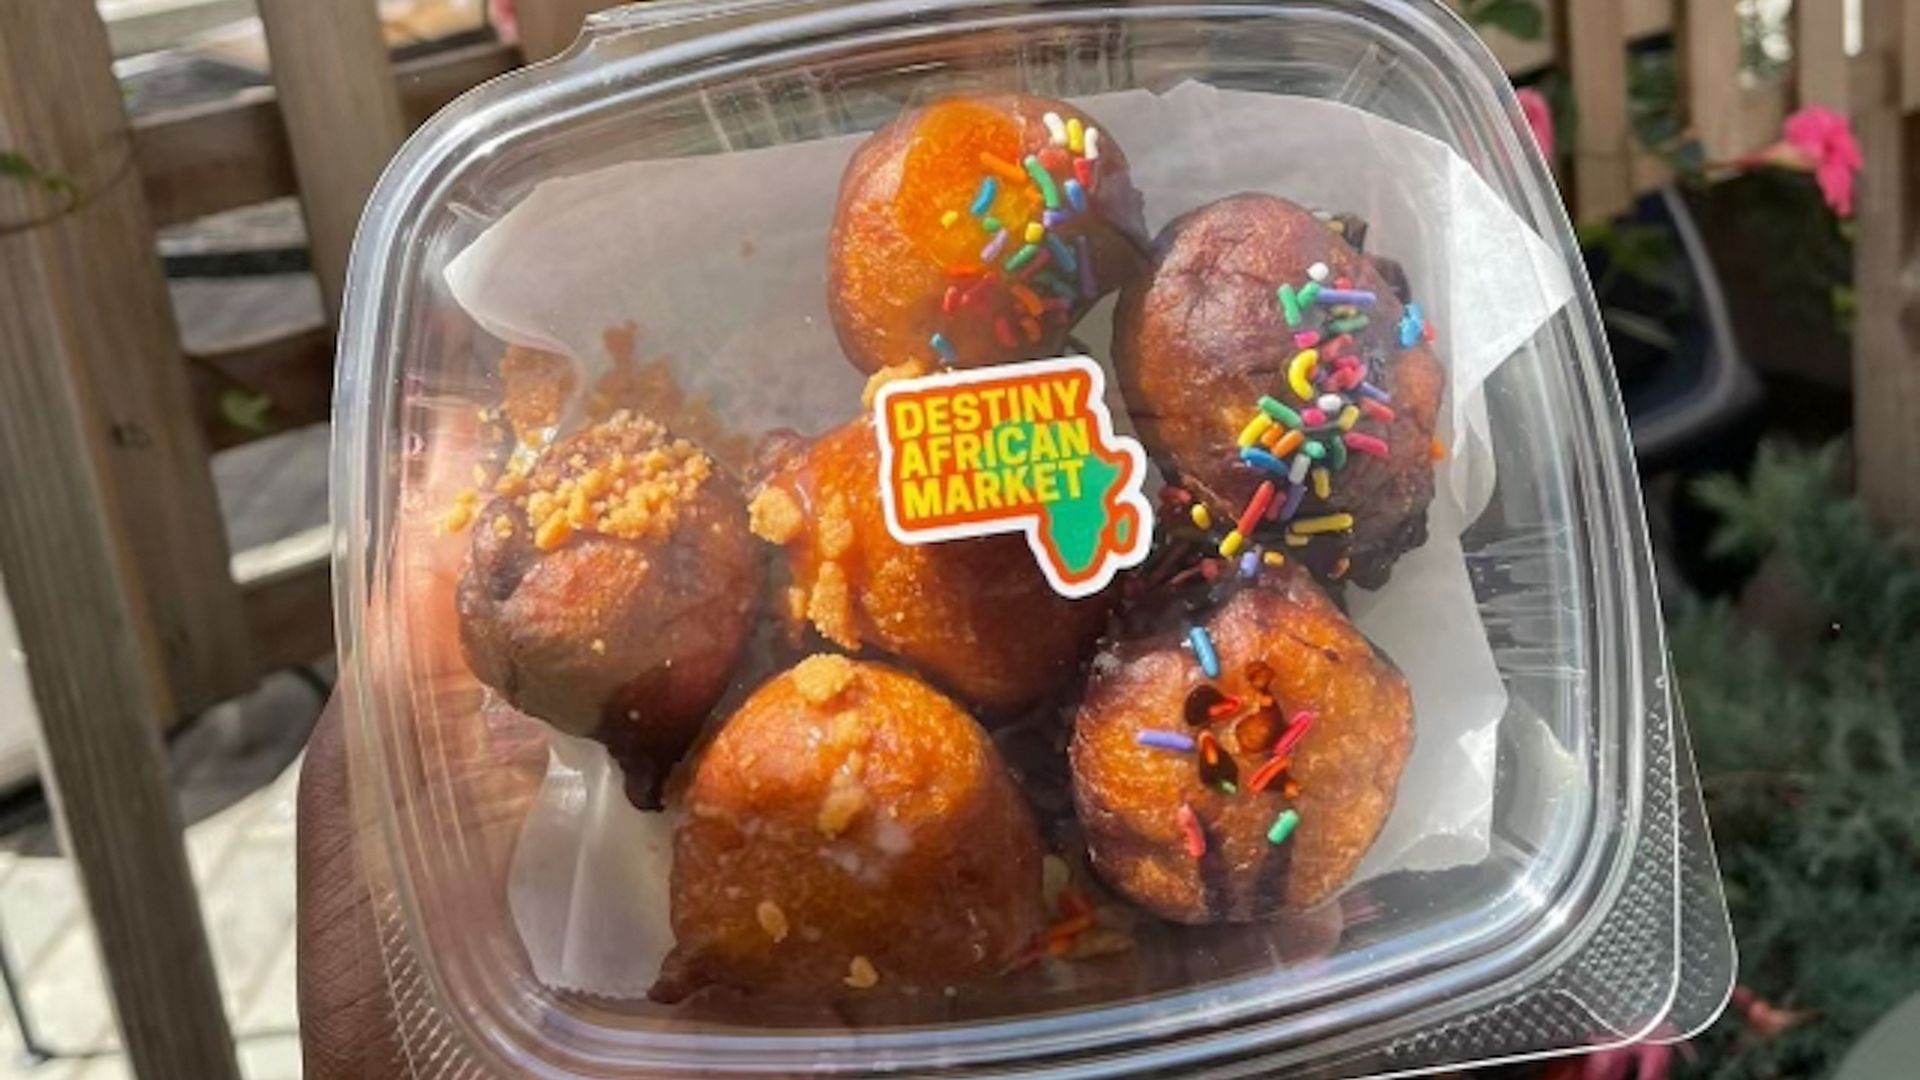 A person holds a plastic container filled with puff-puff pastries, or Nigerian fried dough balls covered in chocolate.